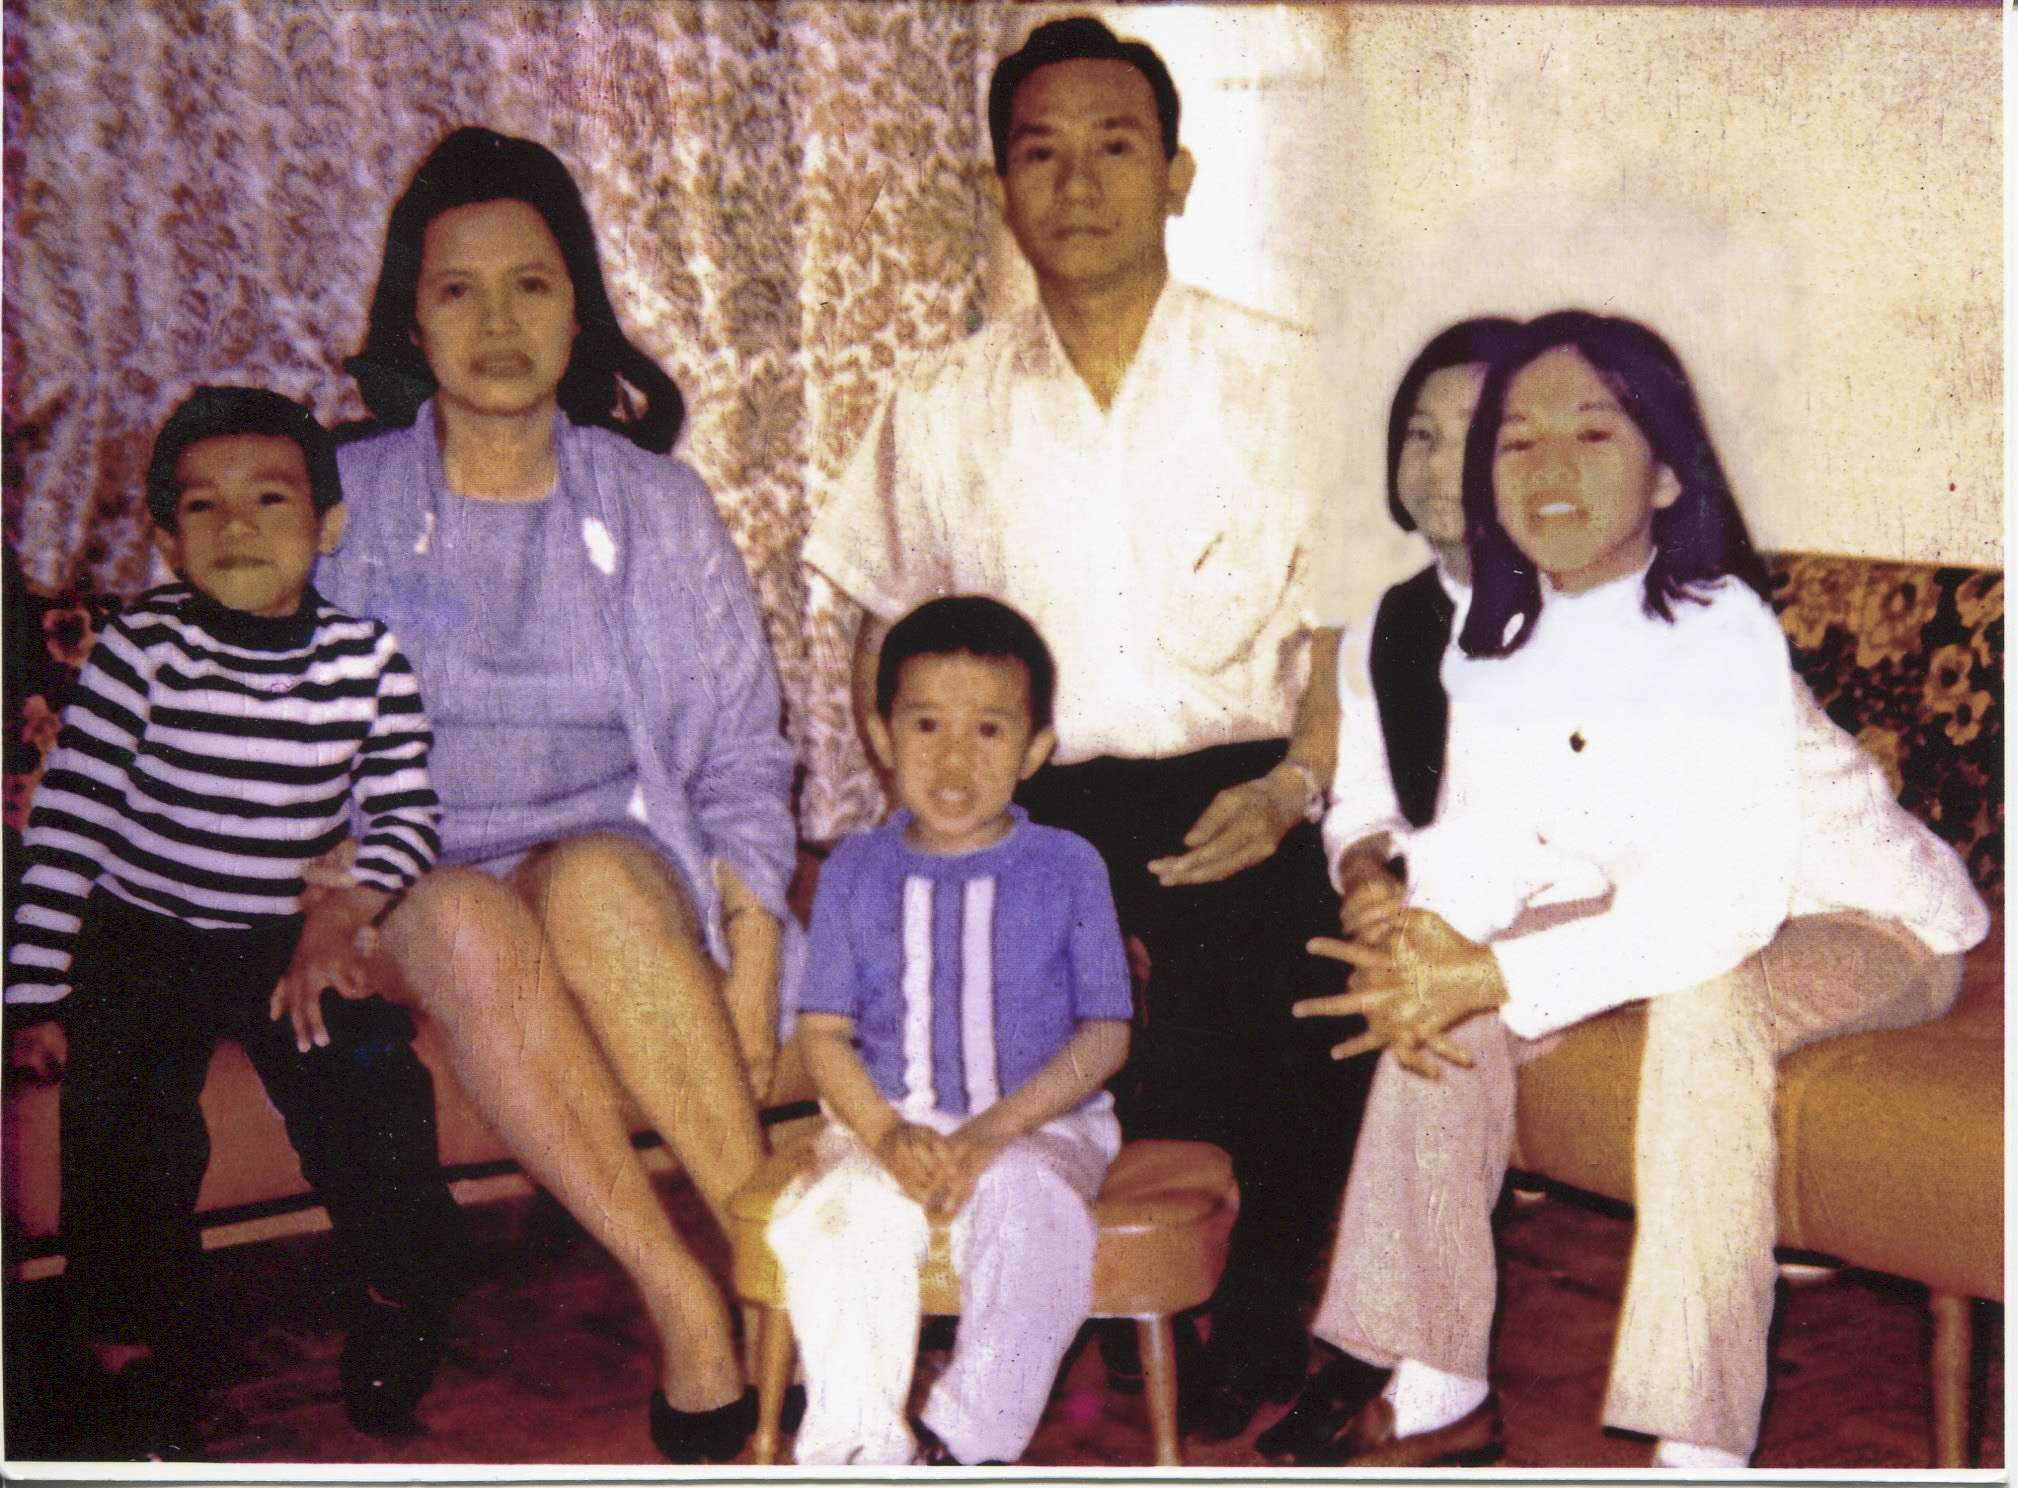 Photo of Arguelles and familyThis photo is a copy but the original was taken in 1970. Arguelles acquired it in 2011 from her mother’s collection of her father’s things (after his death). The photo was taken in Toronto, Canada. Left to right are pictured: Lester (brother), Magdalena (mother), Gene(brother), Jose (dad), Magdalena, Althea (sister). Arguelles said the photo may have been taken at a party because the people pictured all dressed up in “fineries” and food was served. Arguelles talked about her family’s early years of being immigrants in Canada. Thefamily was intact but her parents still struggled. Arguelles said the photo makes her think of her experiences and struggles in the early years in Canada. Arguelles also highlighted her sister, who wrote a poem about Canada that won an award. Her sister’s poem was readover the school intercom and used an Indian word for the title, which sticks out for Arguelles. She was proud of her sister. They all struggled though they were different. Arguelles said she knows it was hard on her parents. Any views, findings, conclusions, or recommendations expressed in this story do not necessarily represent those of the National Endowment for the Humanities. (c) Field Museum of Natural History - CC BY-NC 4.0